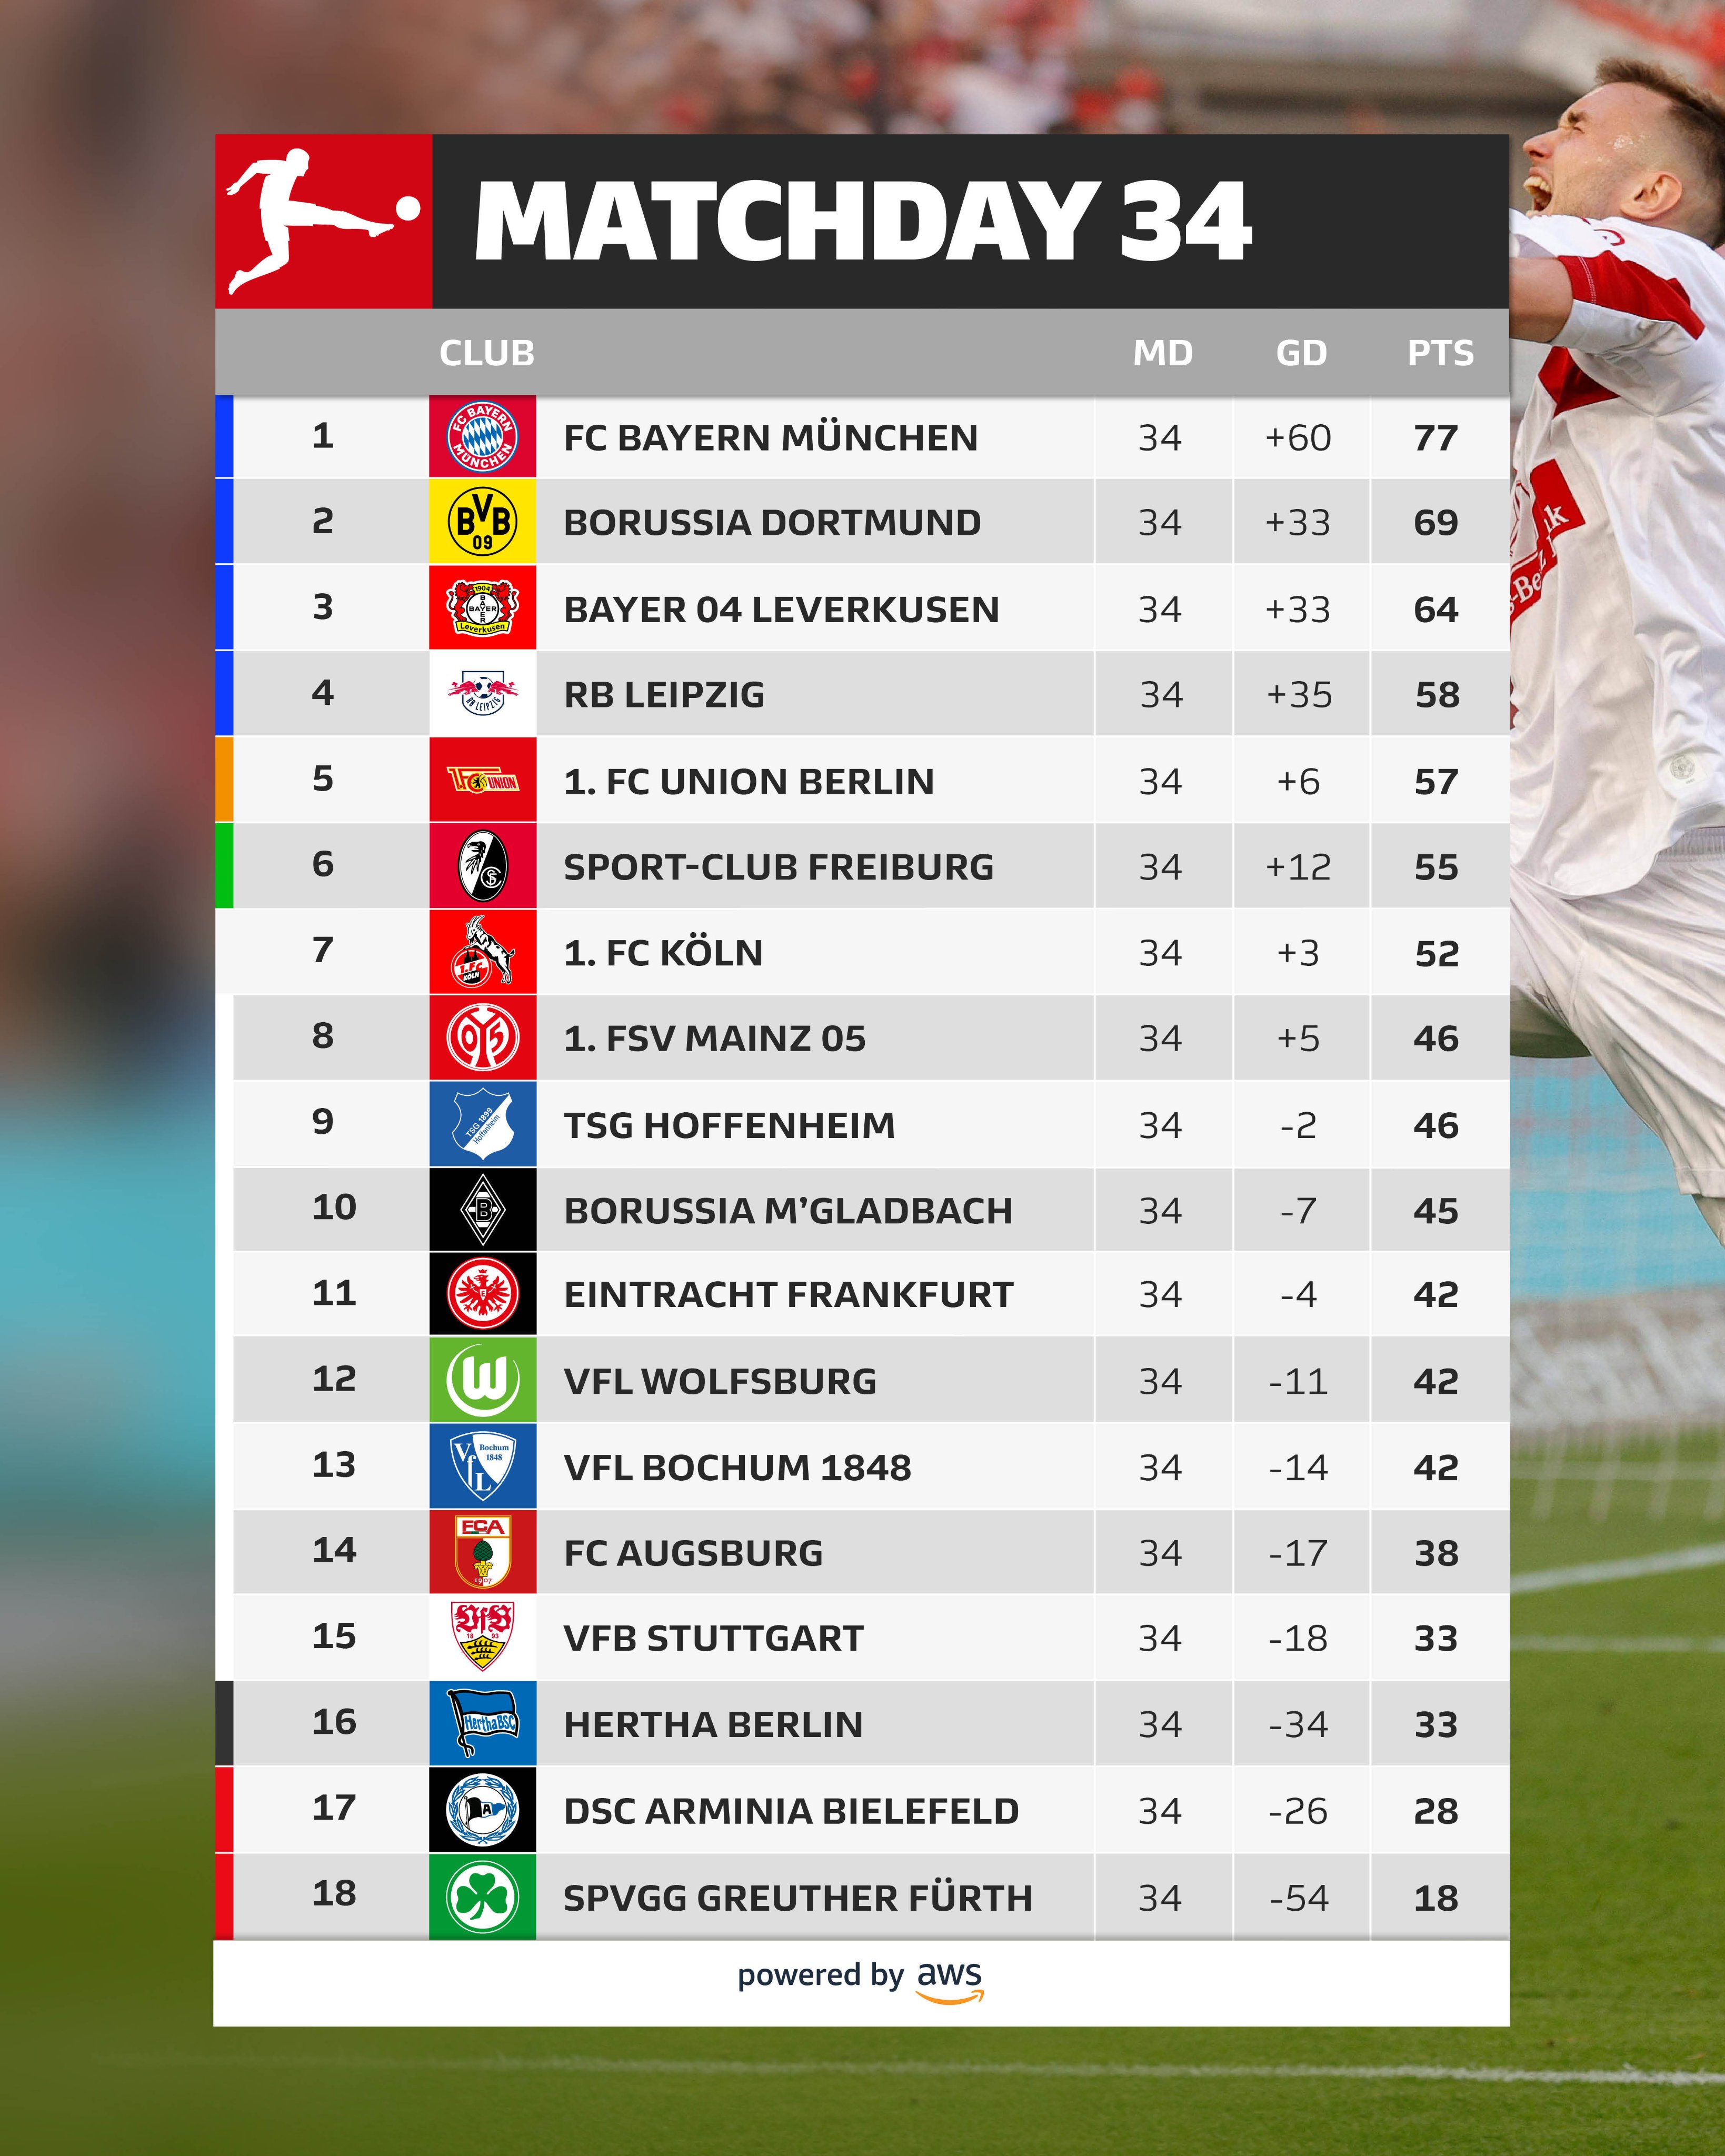 Bundesliga - It's tight at both ends of the table after